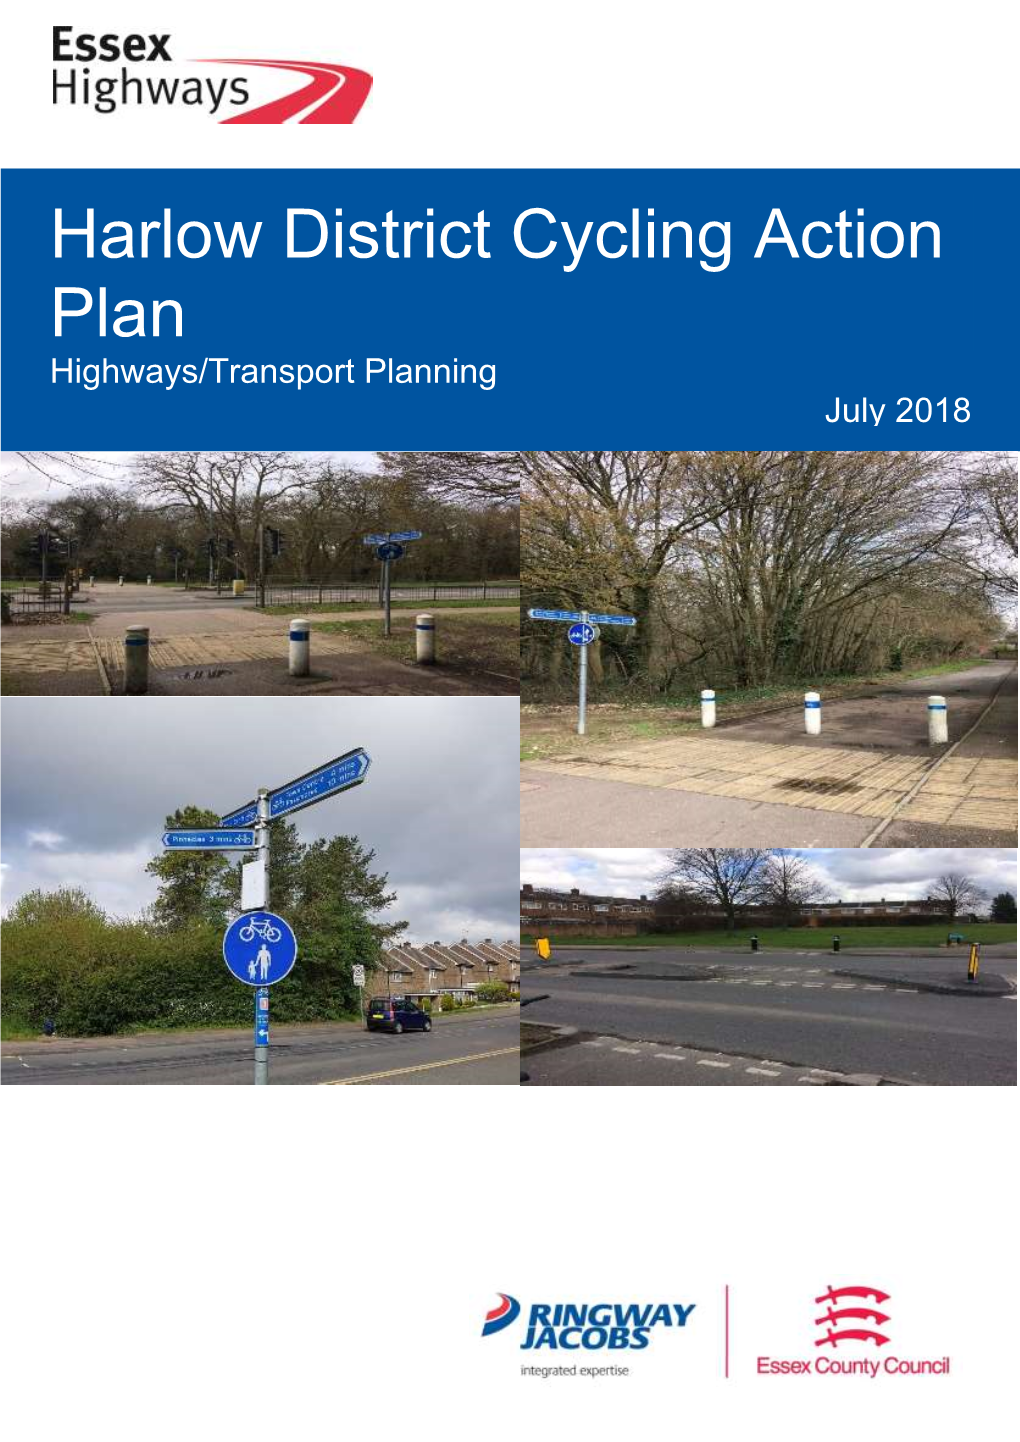 Harlow District Cycling Action Plan